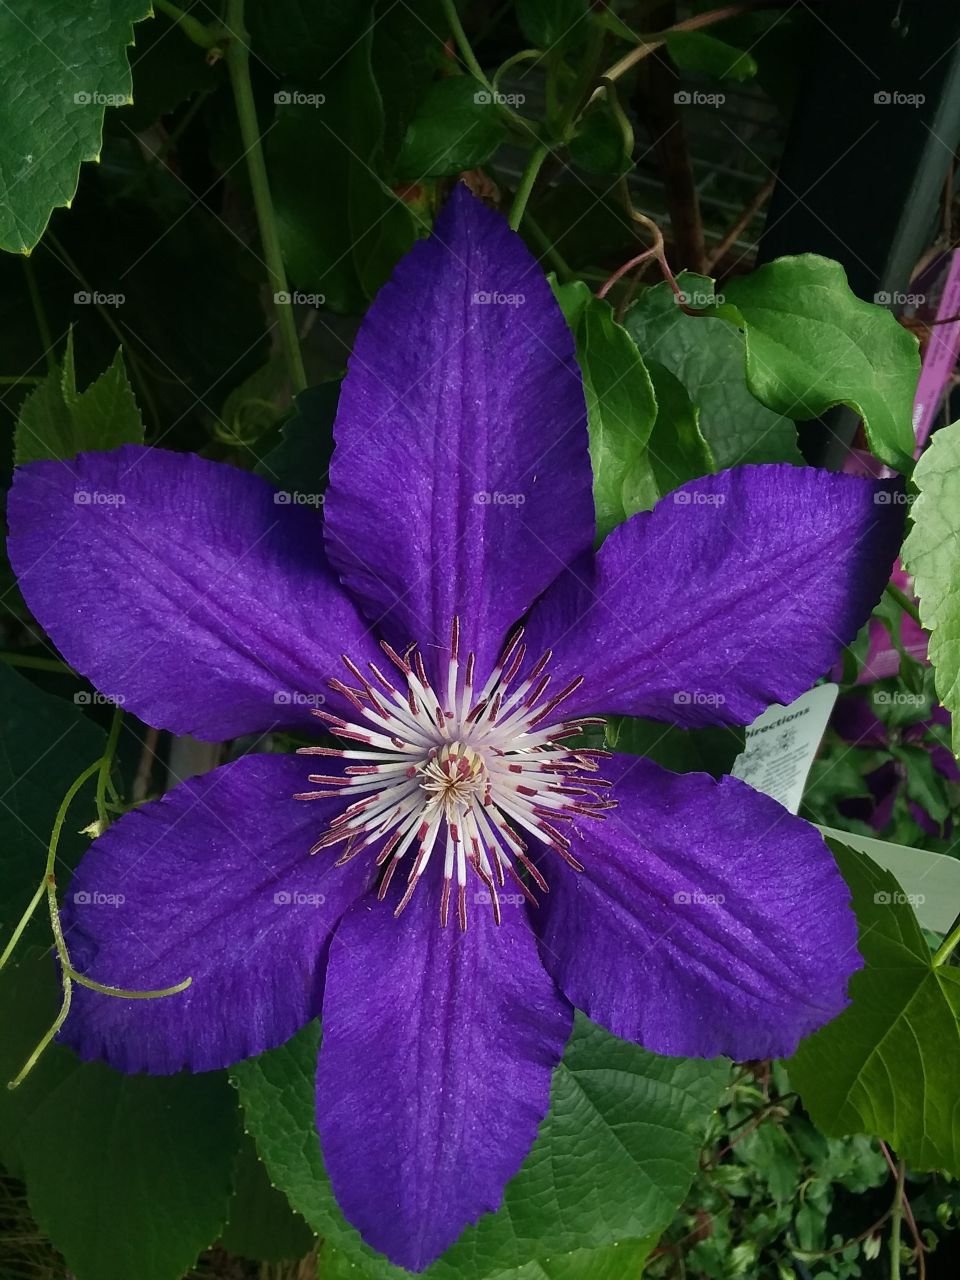 A beautiful purple and white flower, with vibrant green leaves.